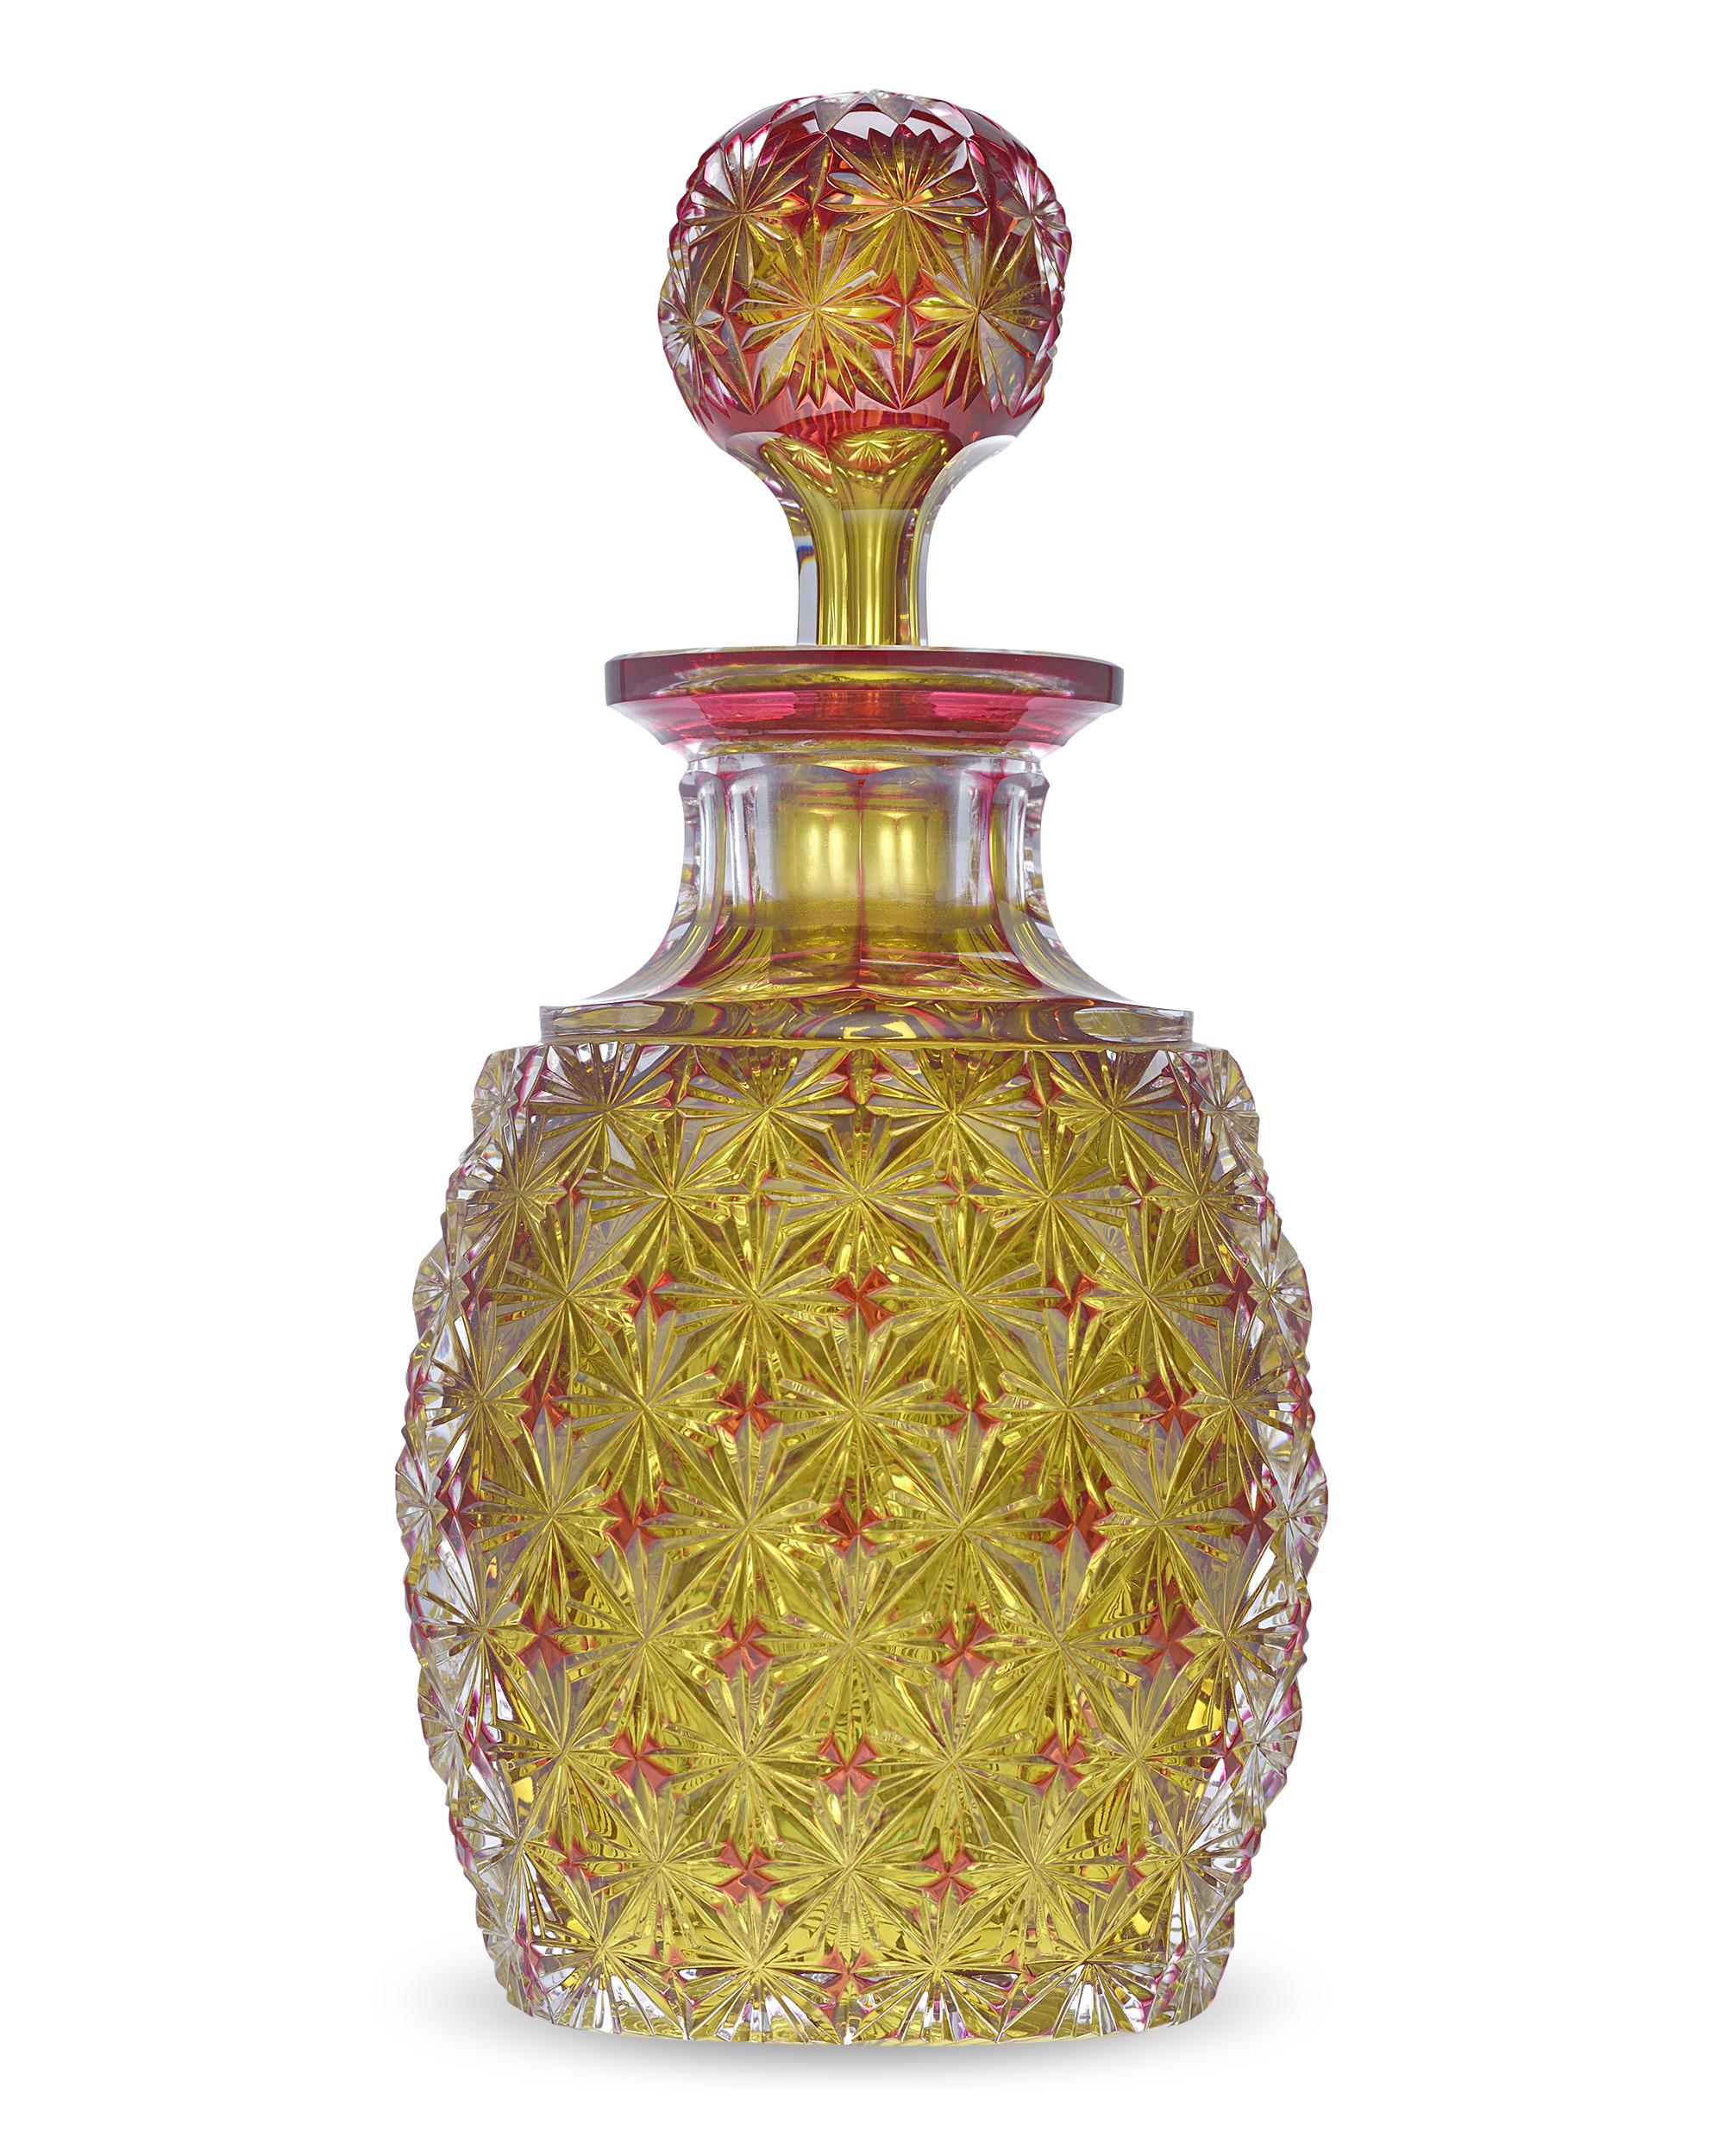 This incredibly rare and extraordinarily beautiful cologne bottle from Mt. Washington Glass Works features a dense yellow foliate motif overlaid above rich red glass. The overall effect is lush and opulent, reflecting the finest work of the company.